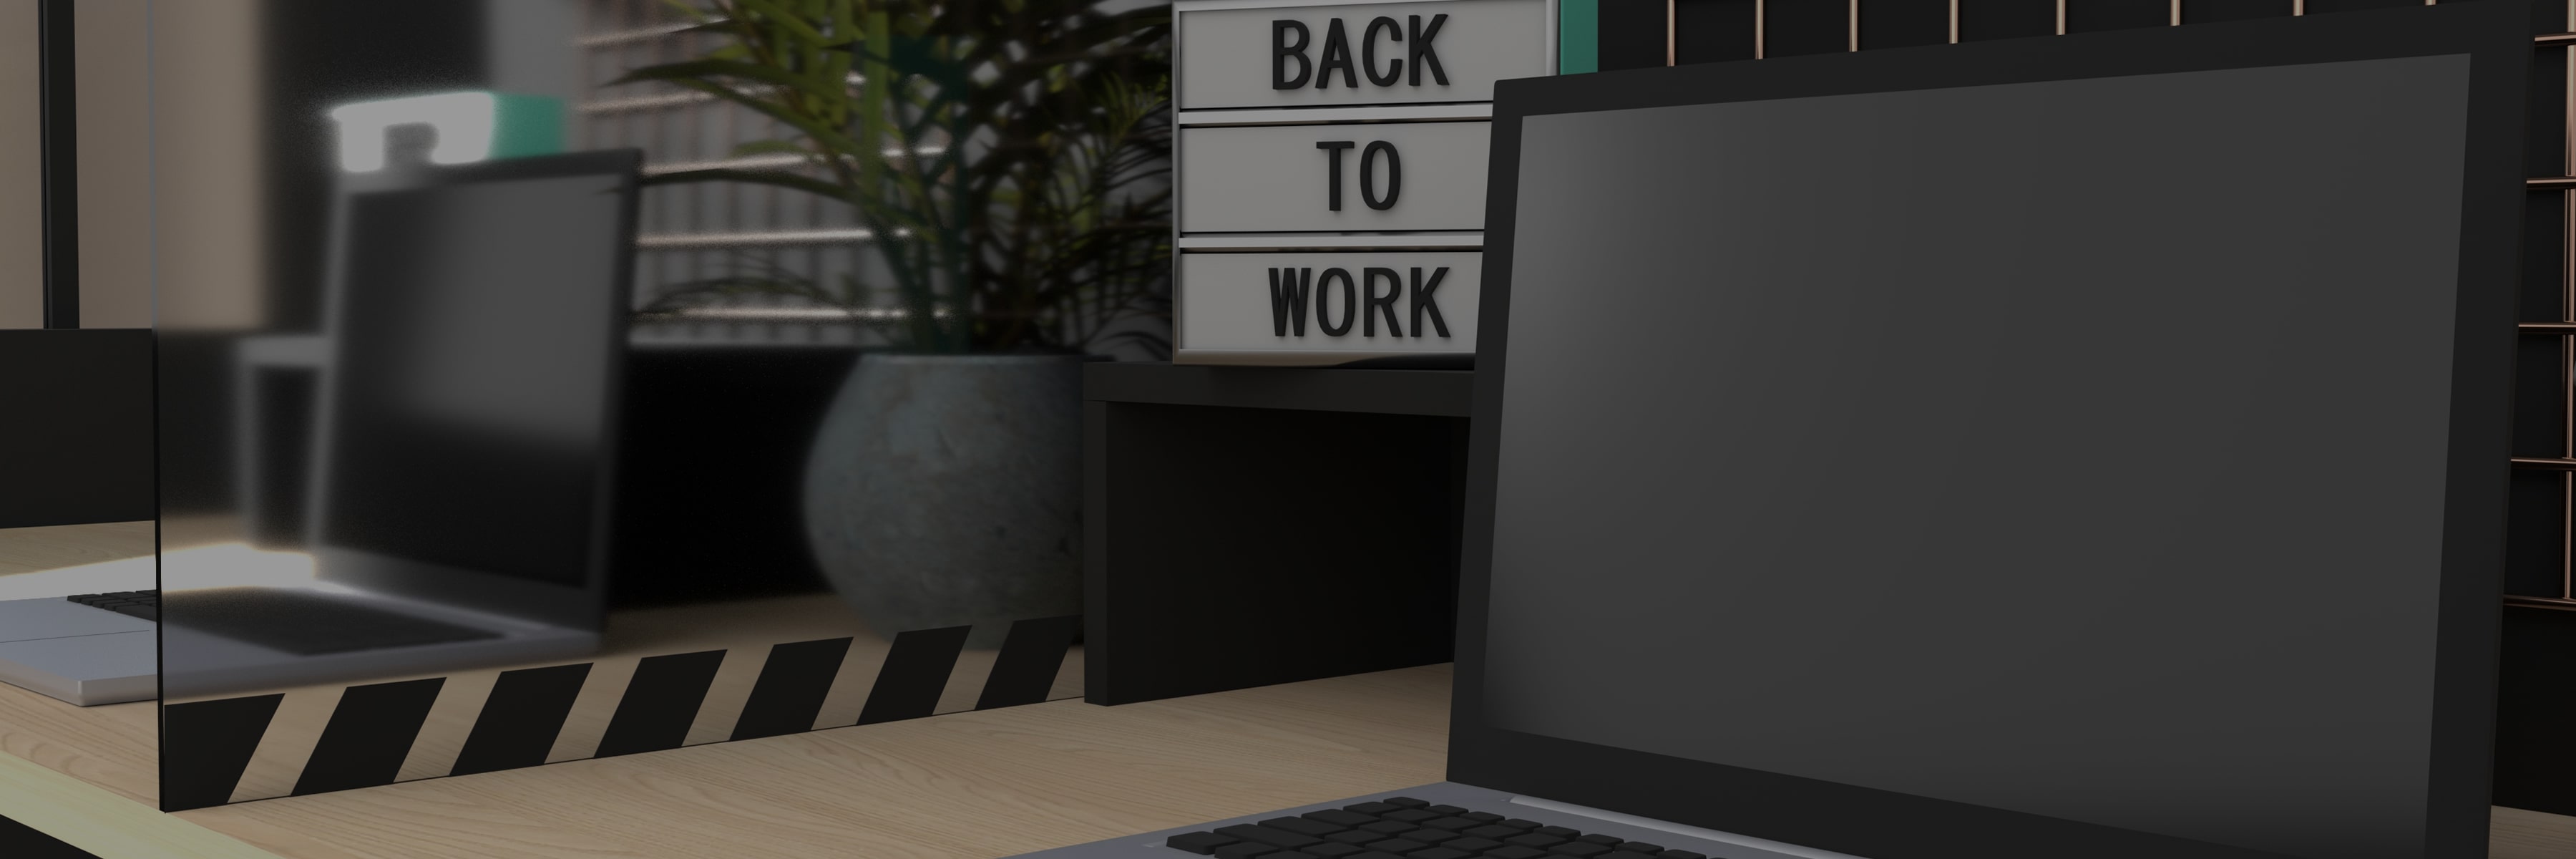 Return to Work | COVID-19 Policies